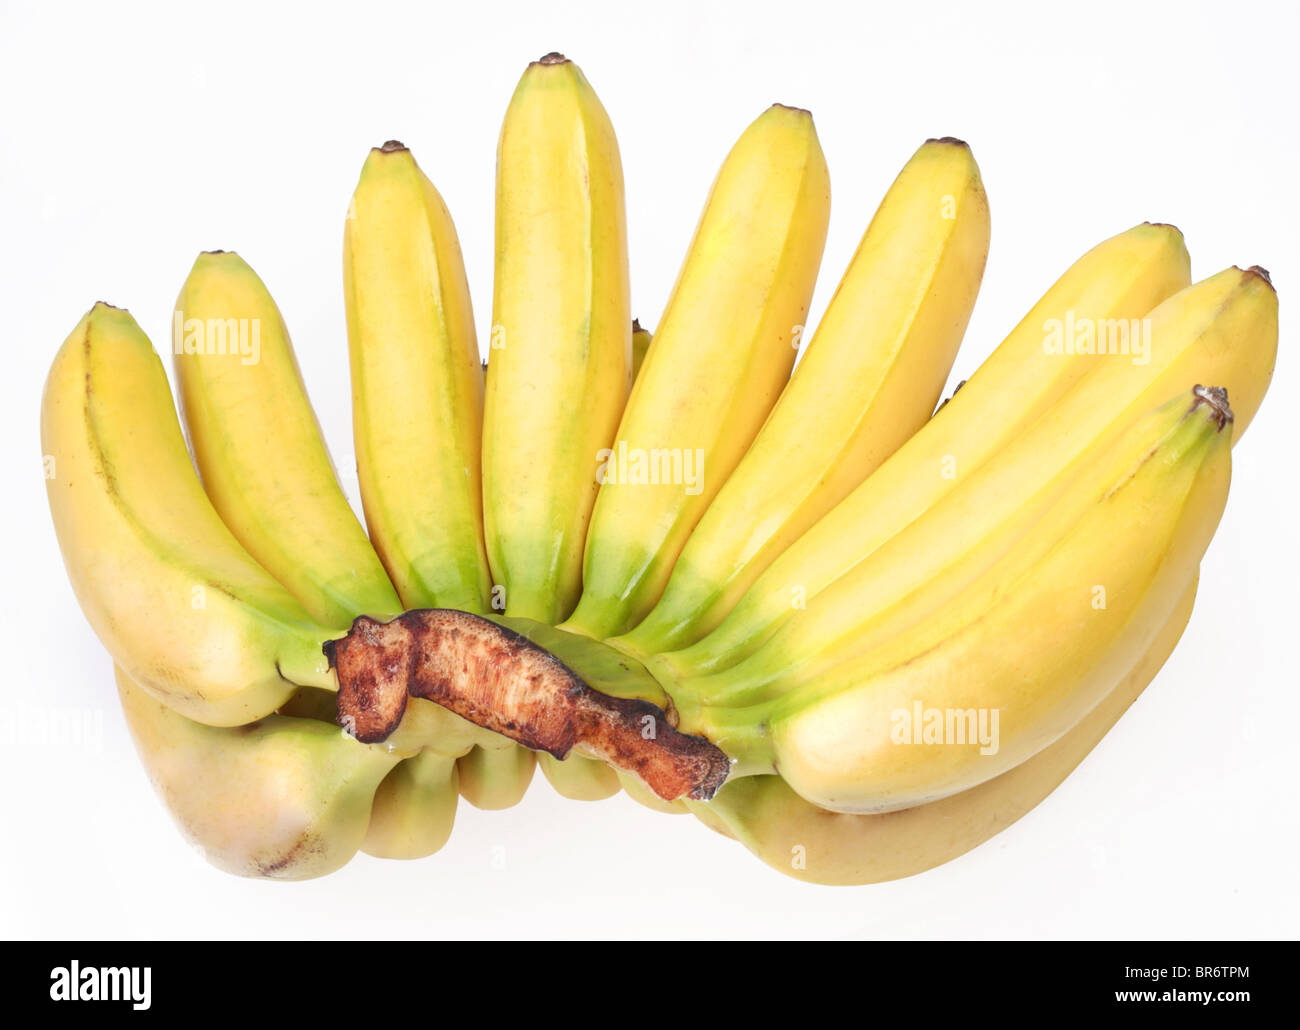 https://c8.alamy.com/comp/BR6TPM/bunch-of-bananas-isolated-on-white-background-BR6TPM.jpg